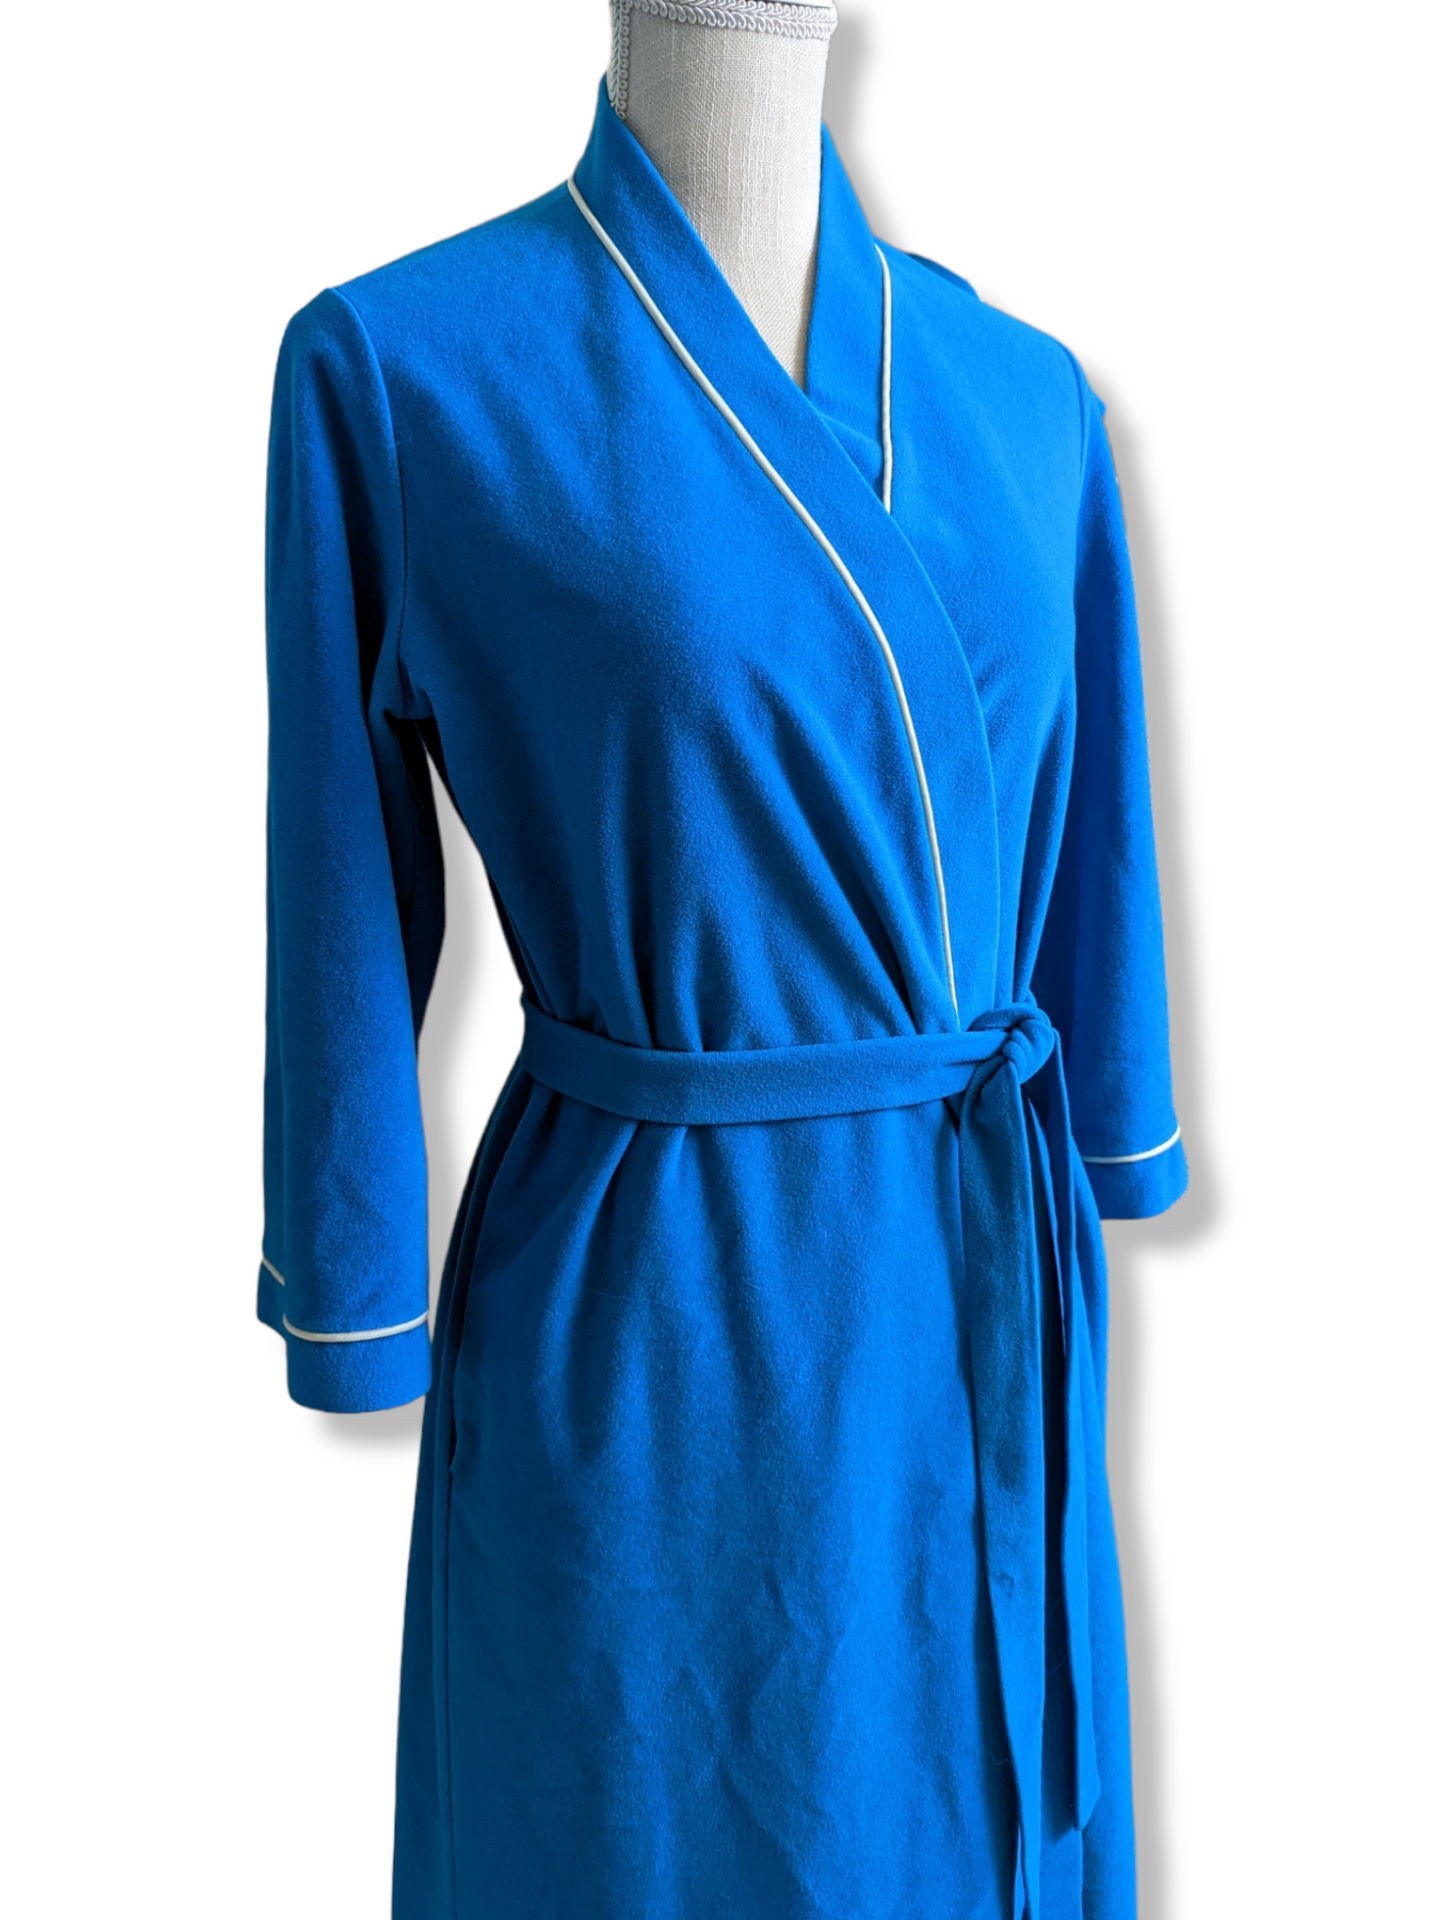 1970s Vanity Fair Dacron Polyester Robe with White Trim, Pockets and Original Robe Tie